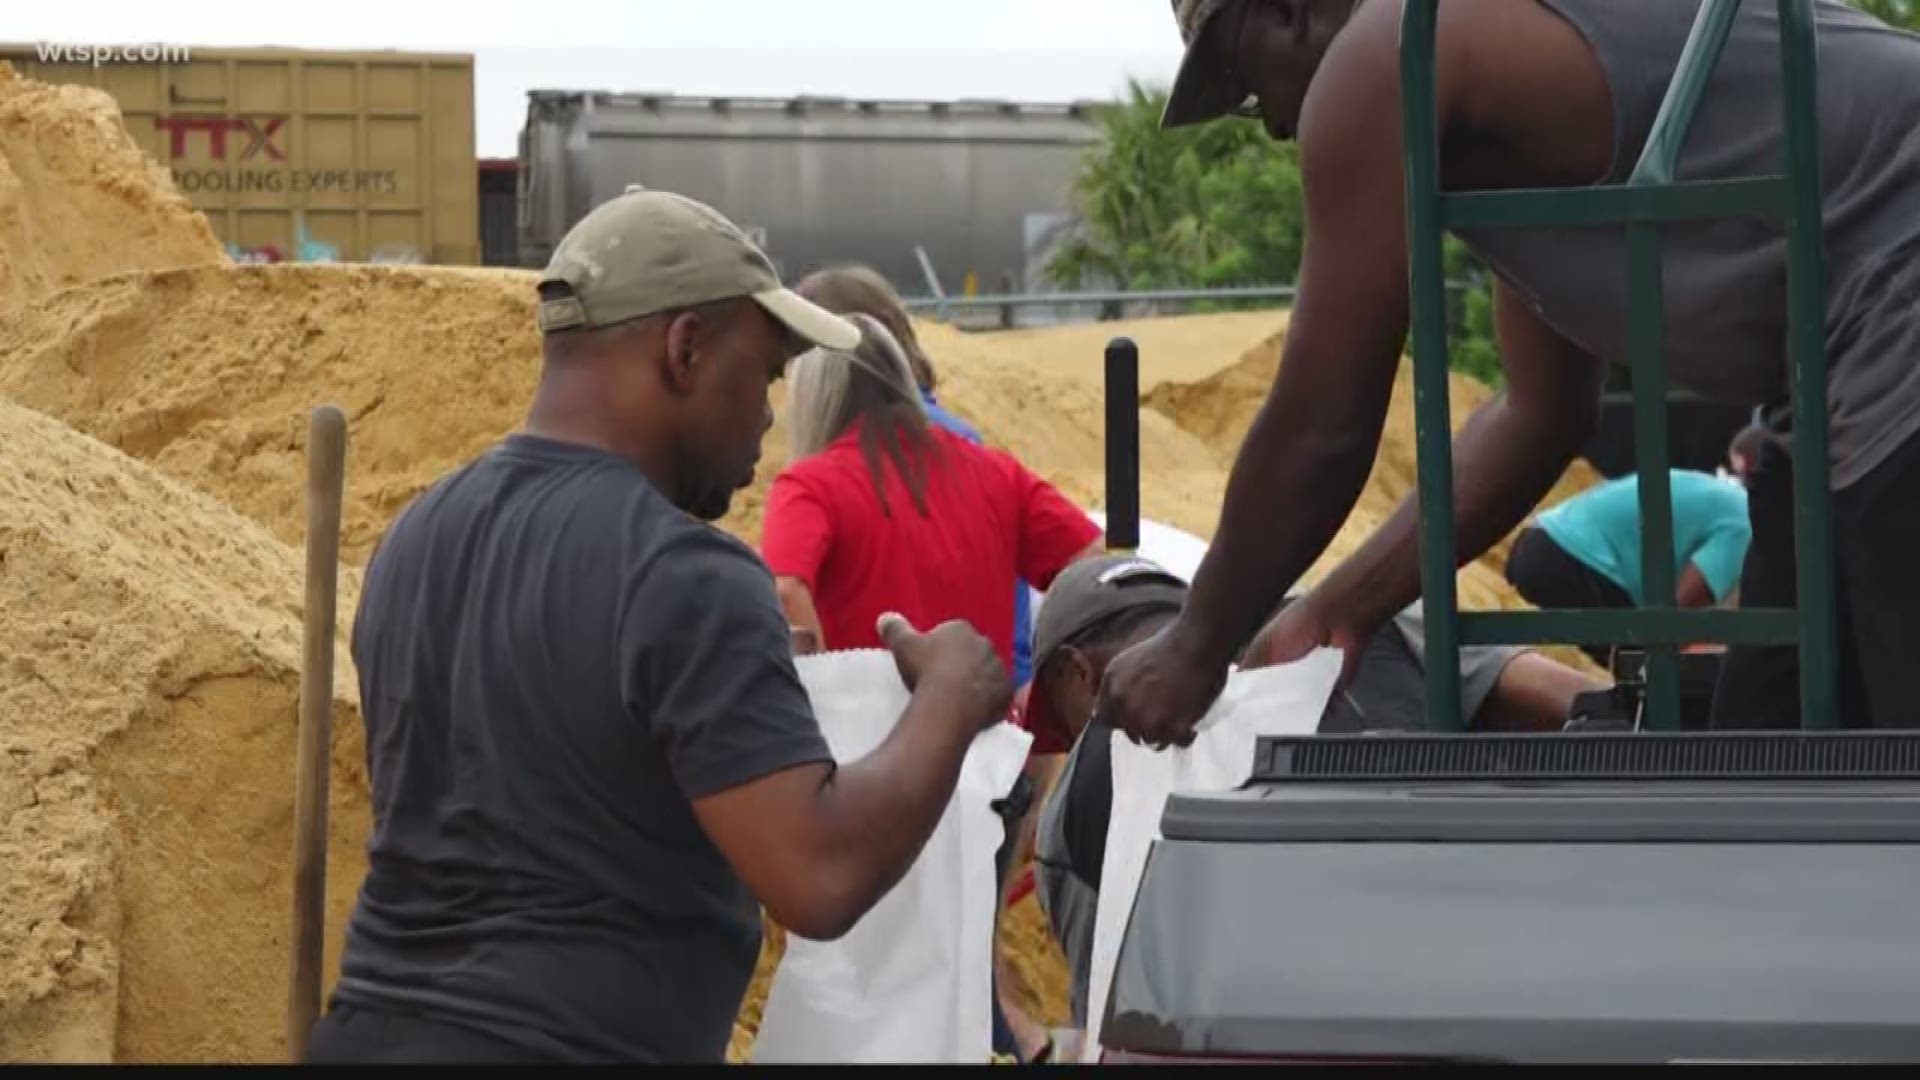 The Polk County community is preparing for Hurricane Dorian. People are filling their sandbags and getting their homes ready before the possible impacts hit their area.